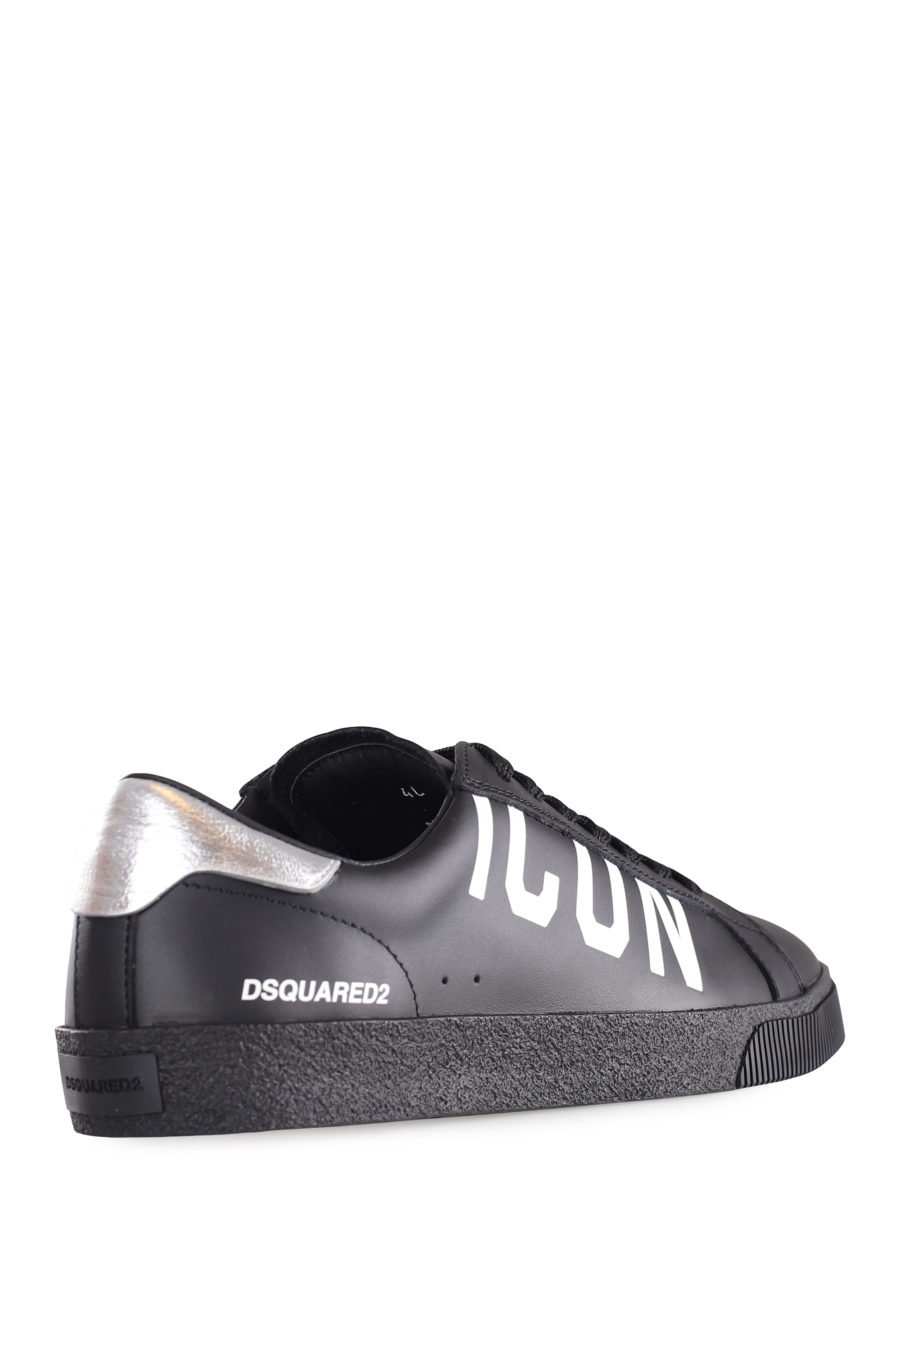 Black trainers with diagonal "icon" logo and silver detail - IMG 9563